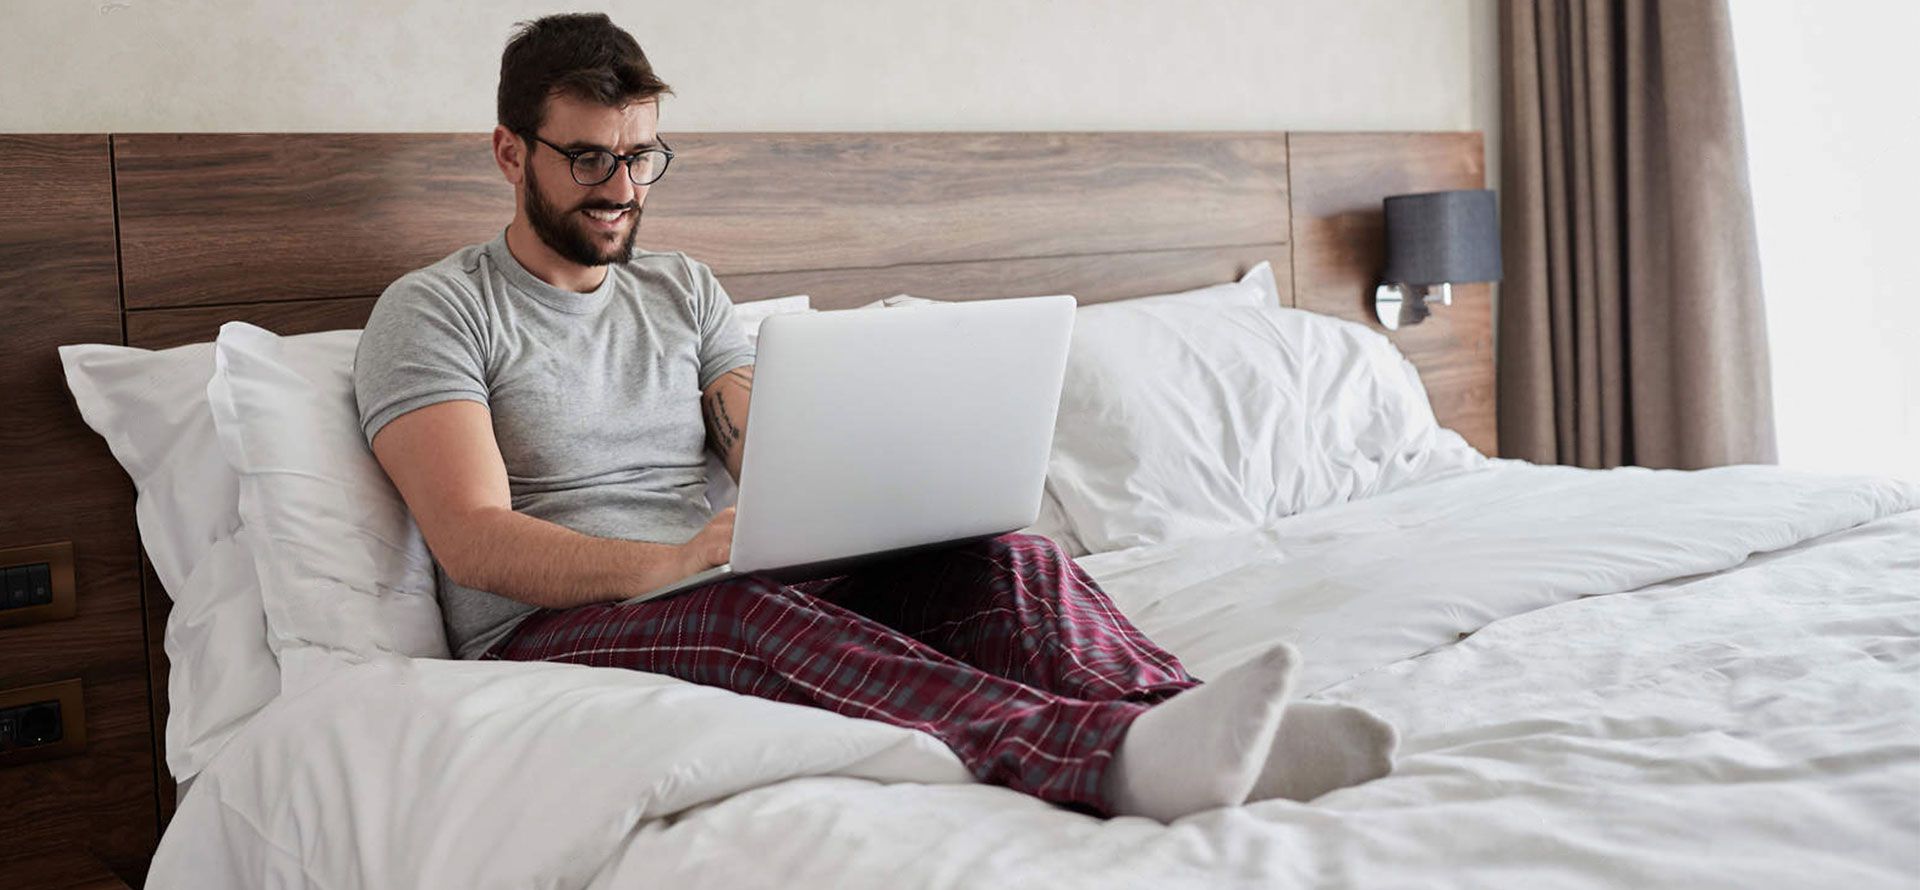 Man with laptop on the mattress.